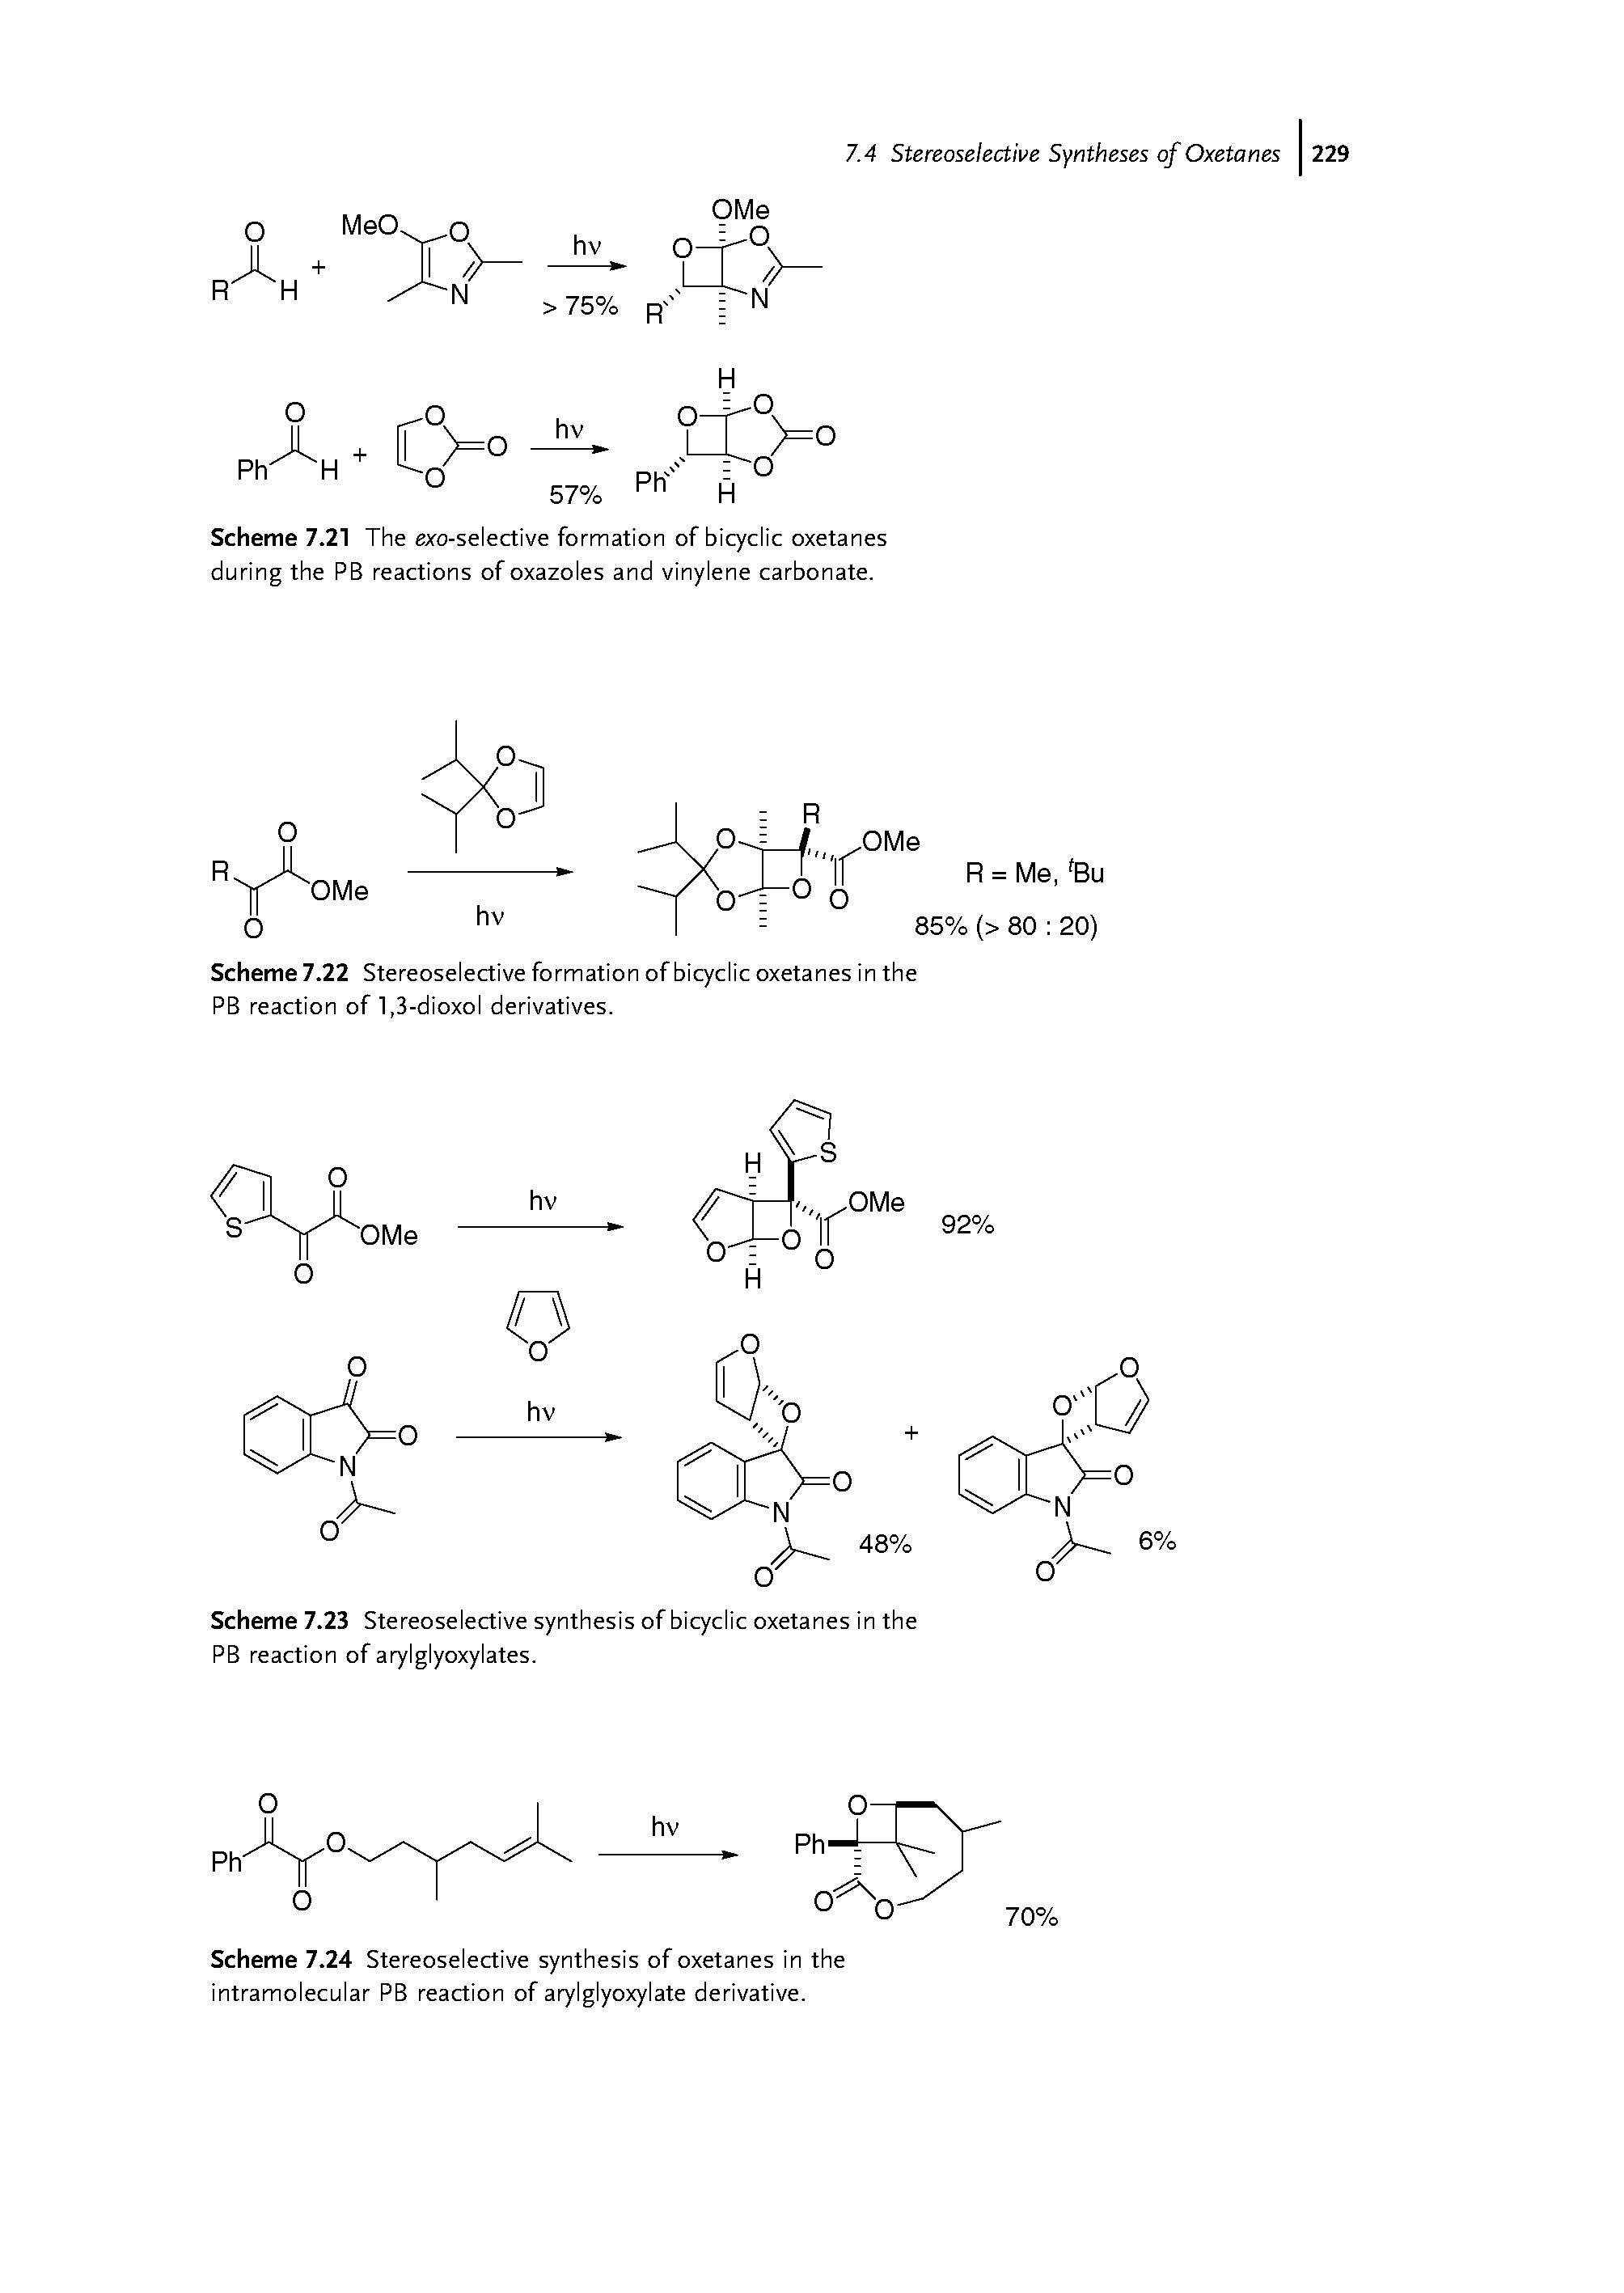 Scheme 7.21 The exo-selective formation of bicyclic oxetanes during the PB reactions of oxazoles and vinylene carbonate.